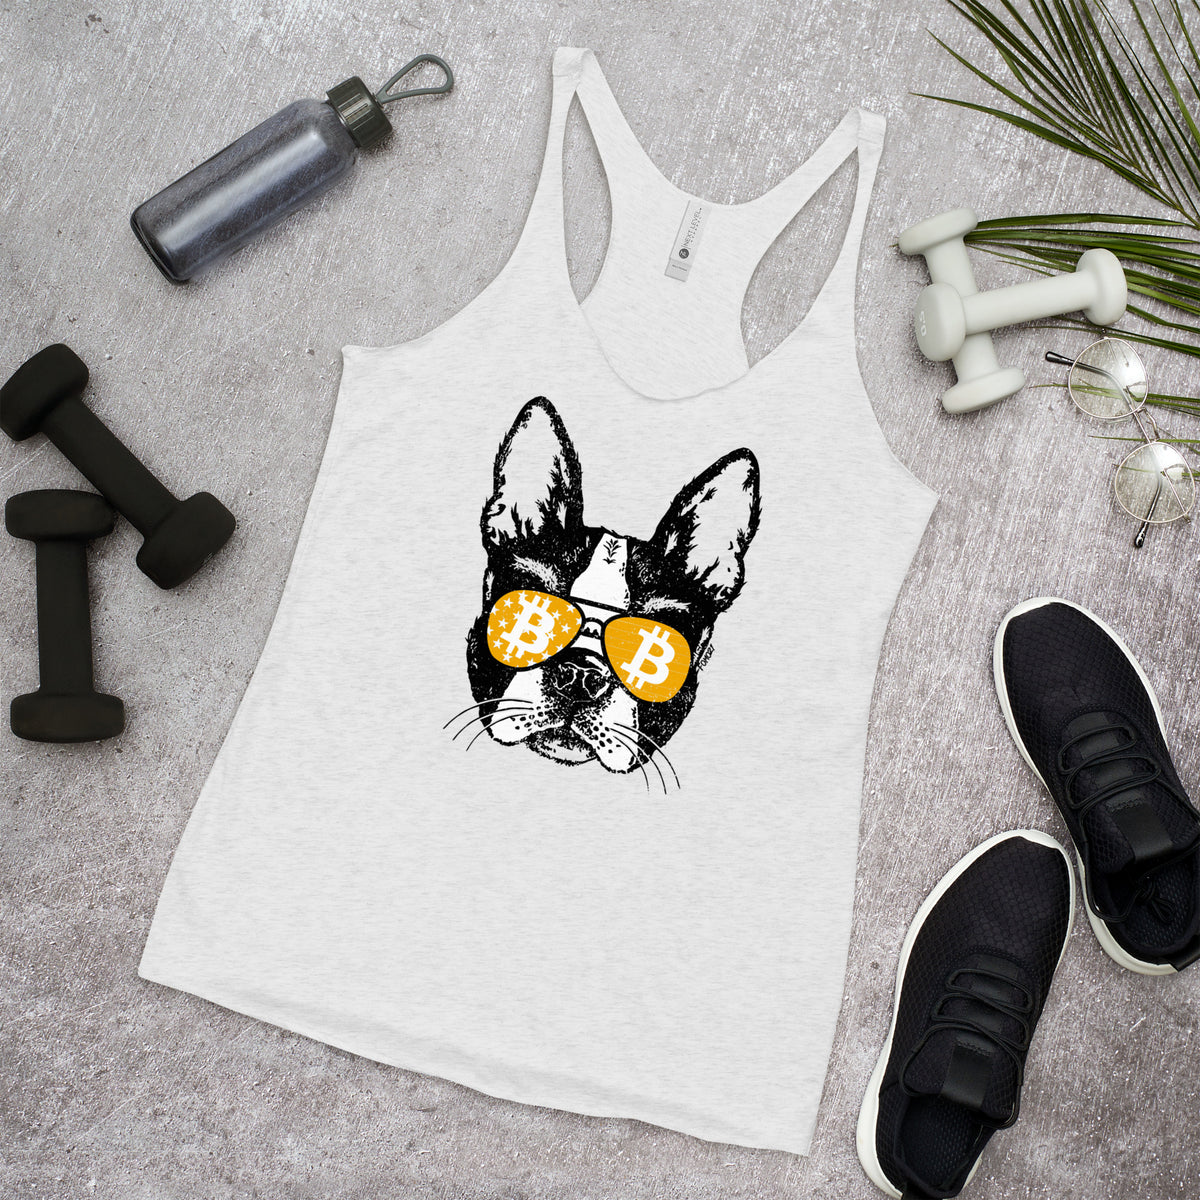 Bitcoin Is For The Dogs Women's Tank Top - fomo21